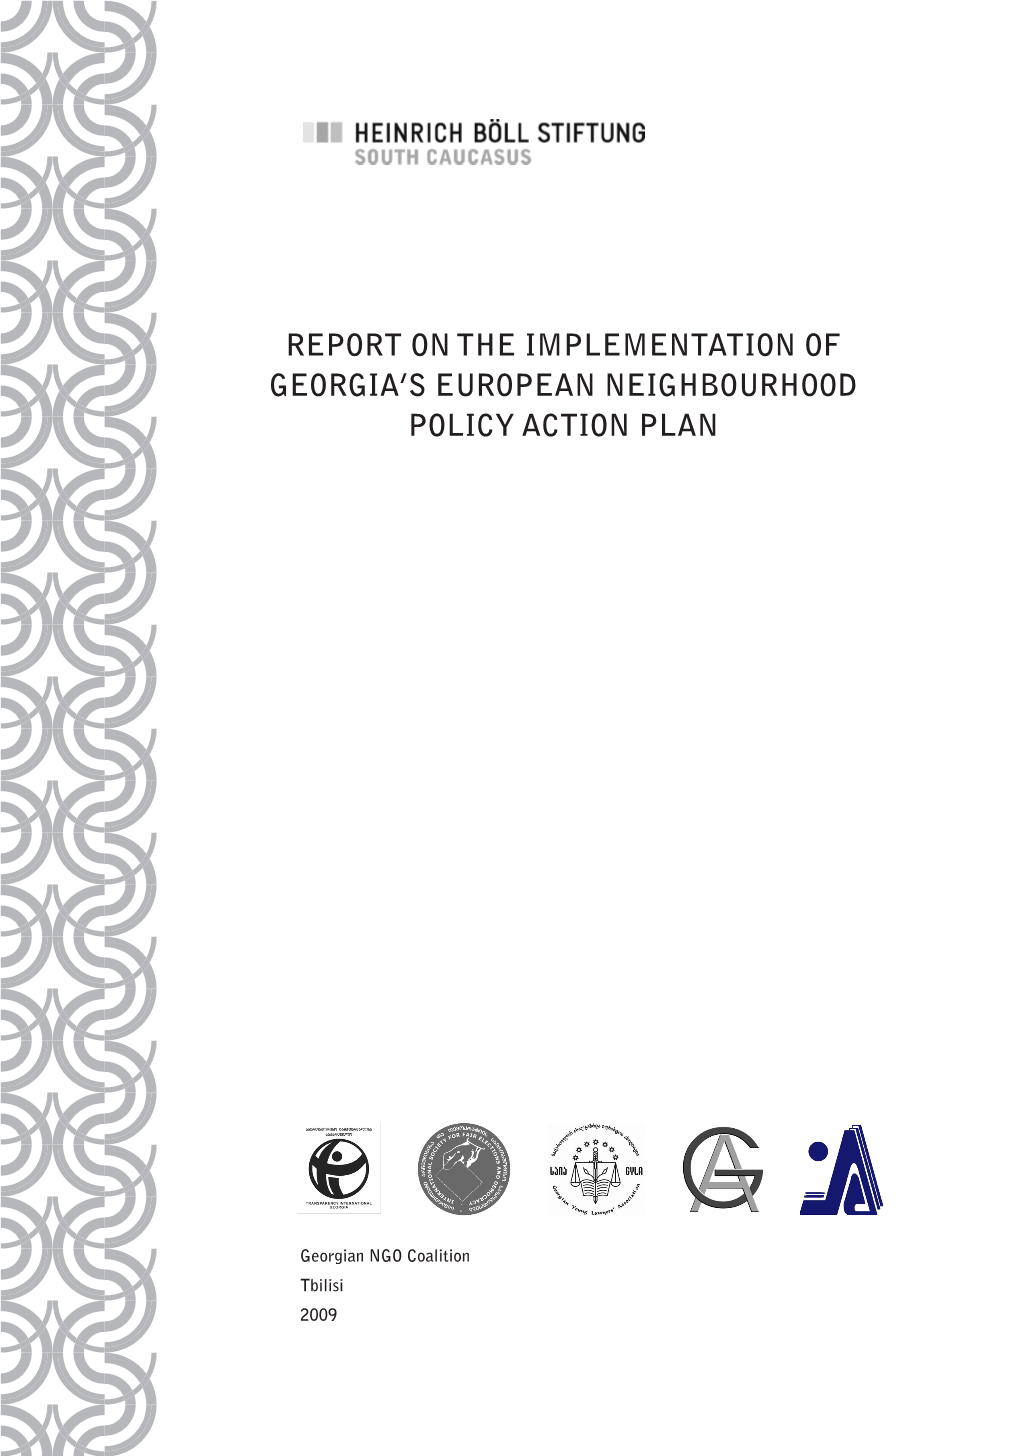 Report on the Implementation of Georgia's European